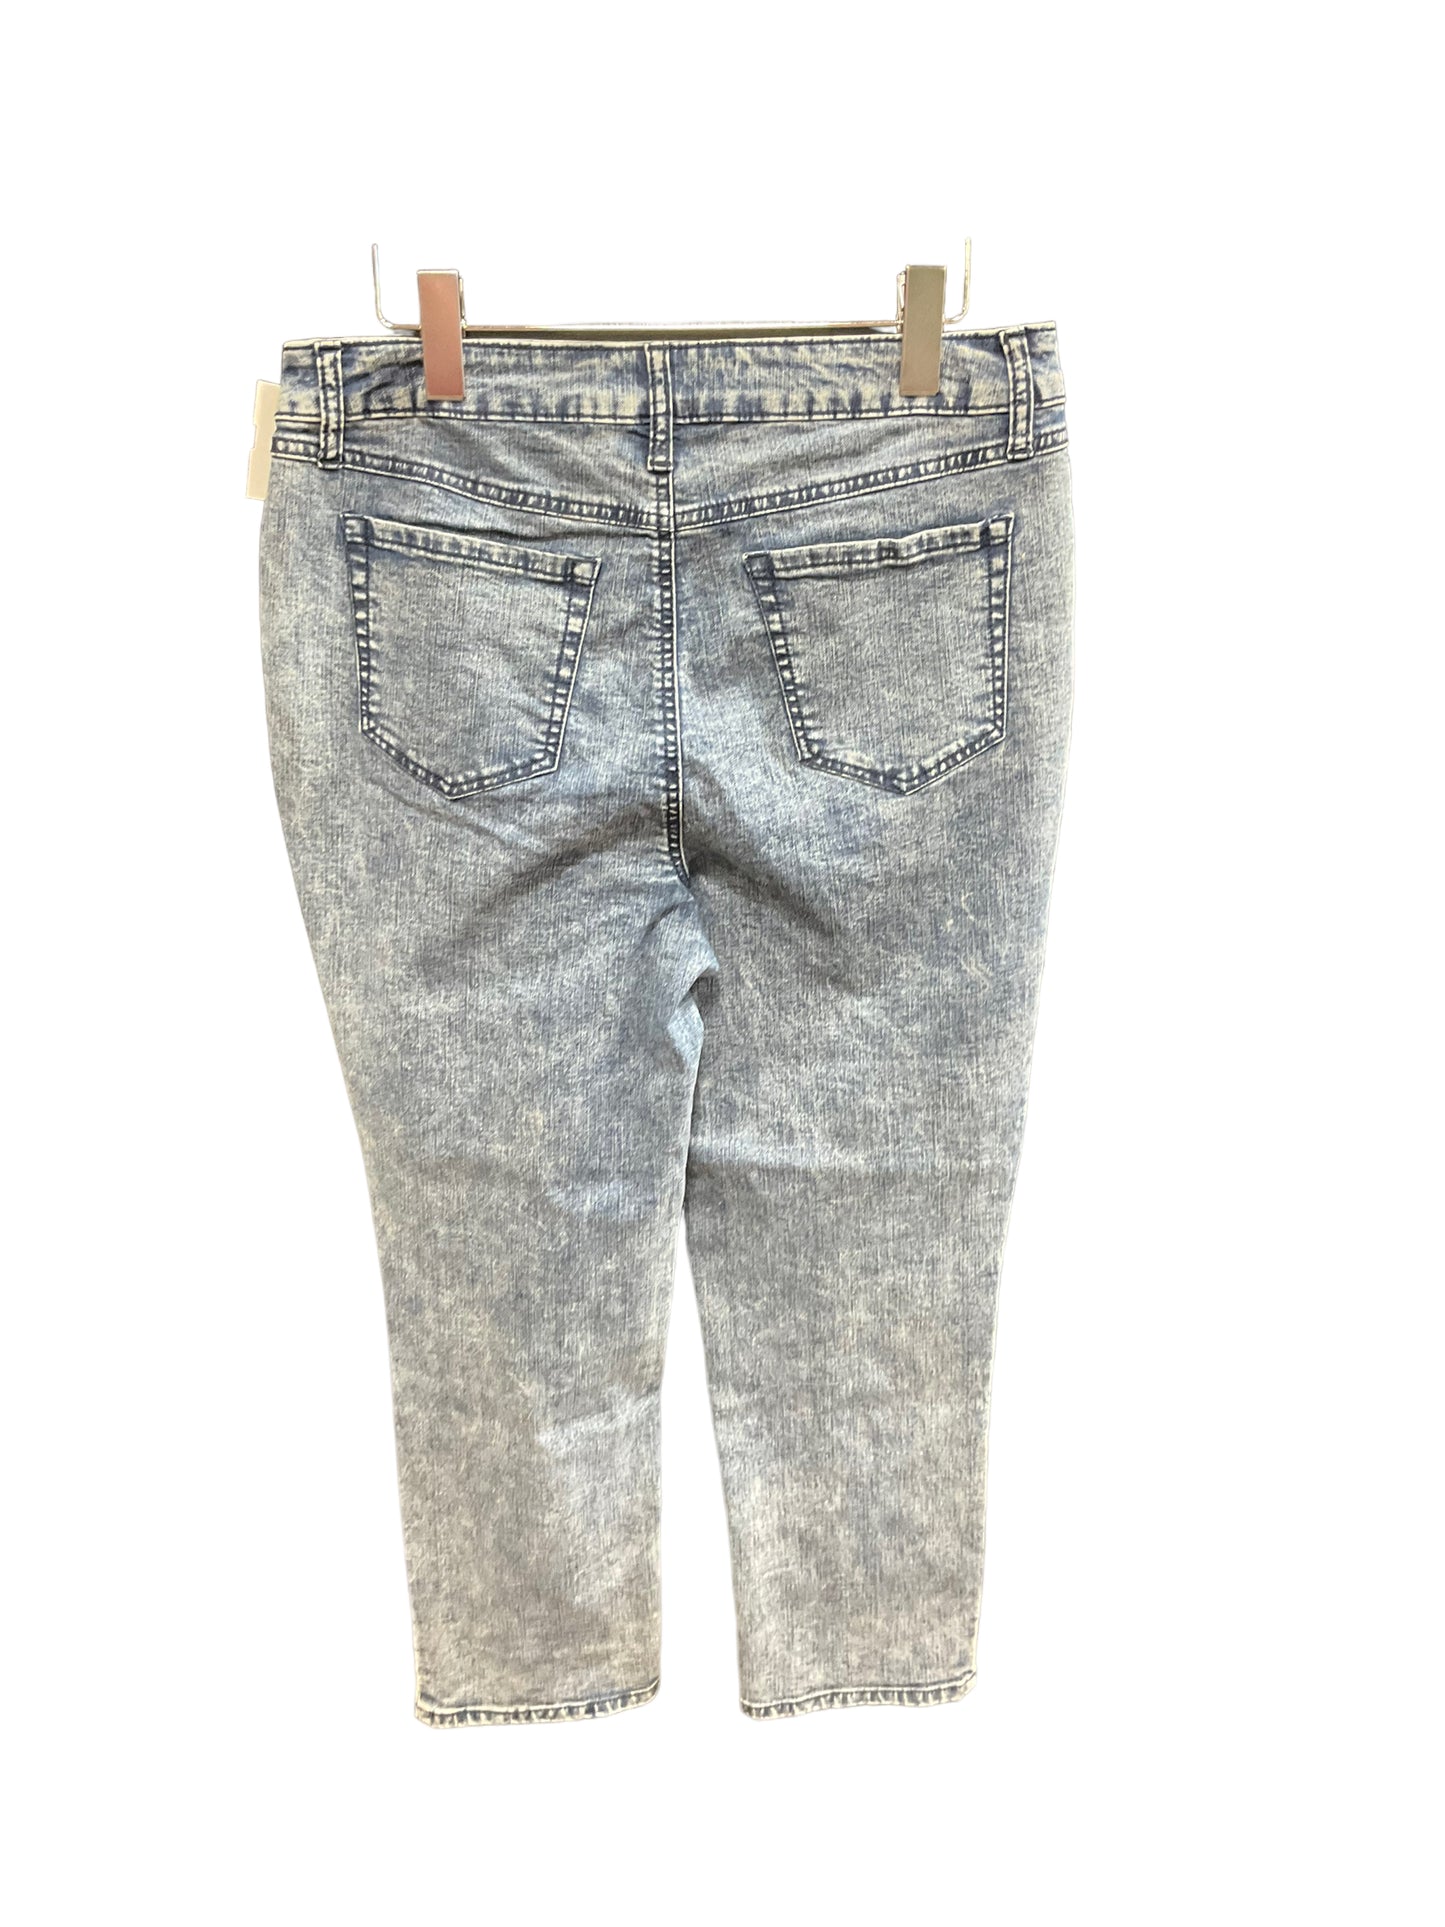 Jeans Relaxed/boyfriend By Clothes Mentor  Size: 12